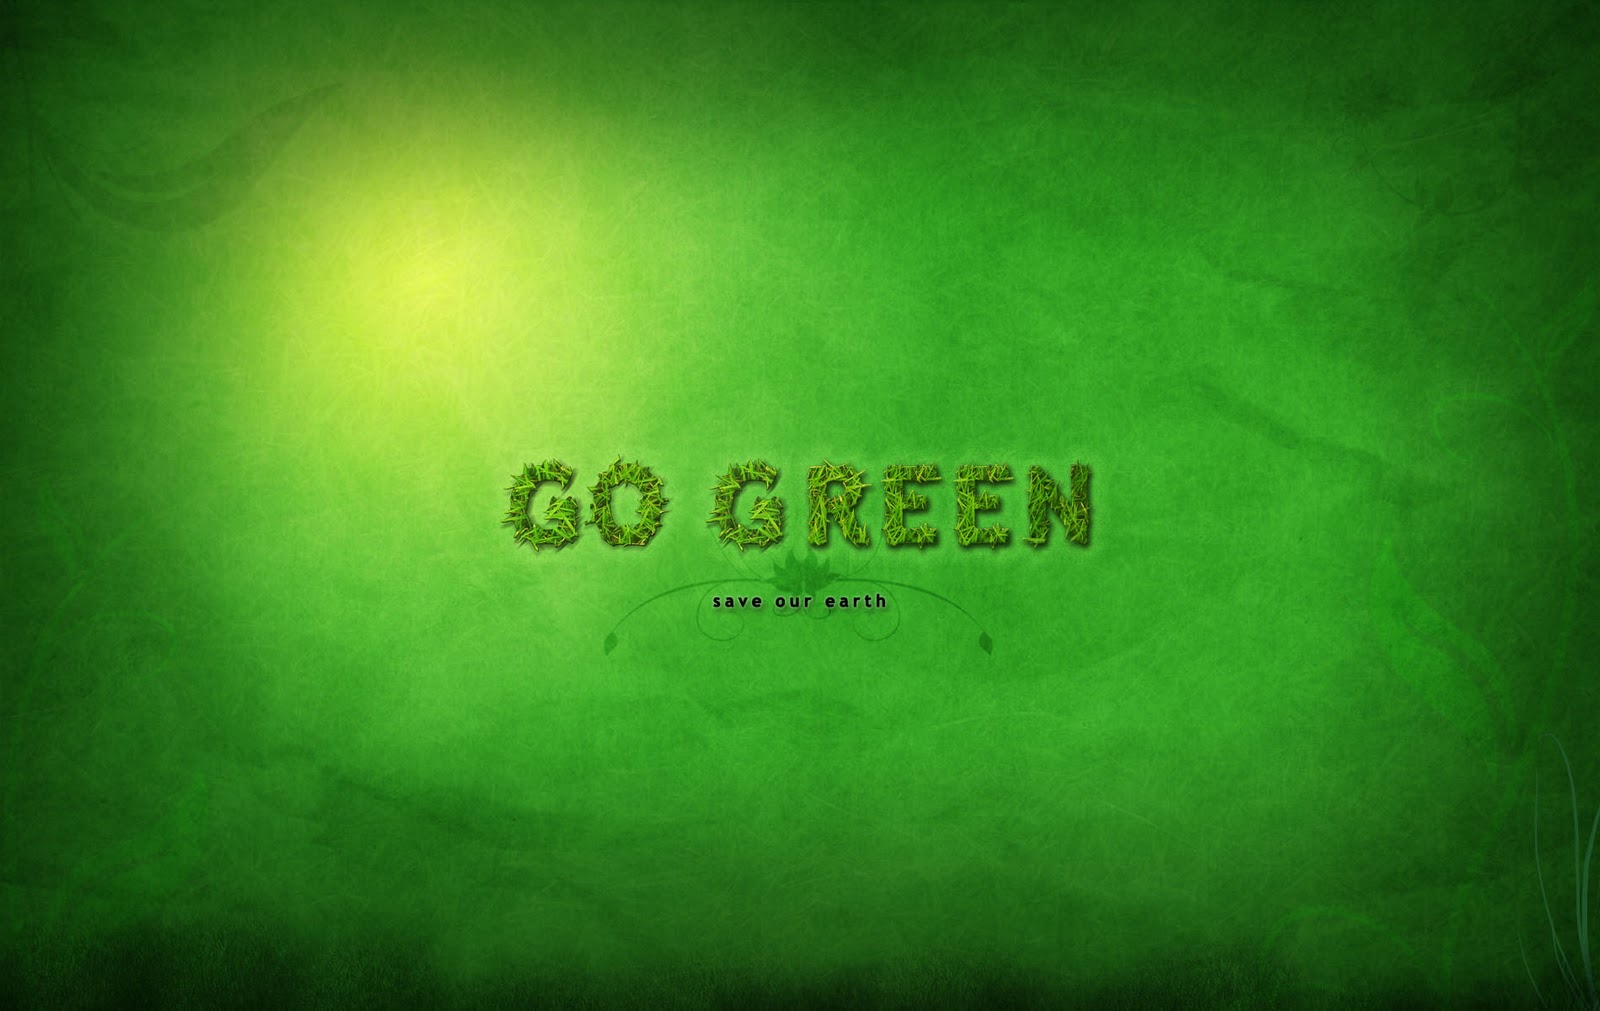 HD WALLPAPERS GO GREENSAVE OUR EARTH